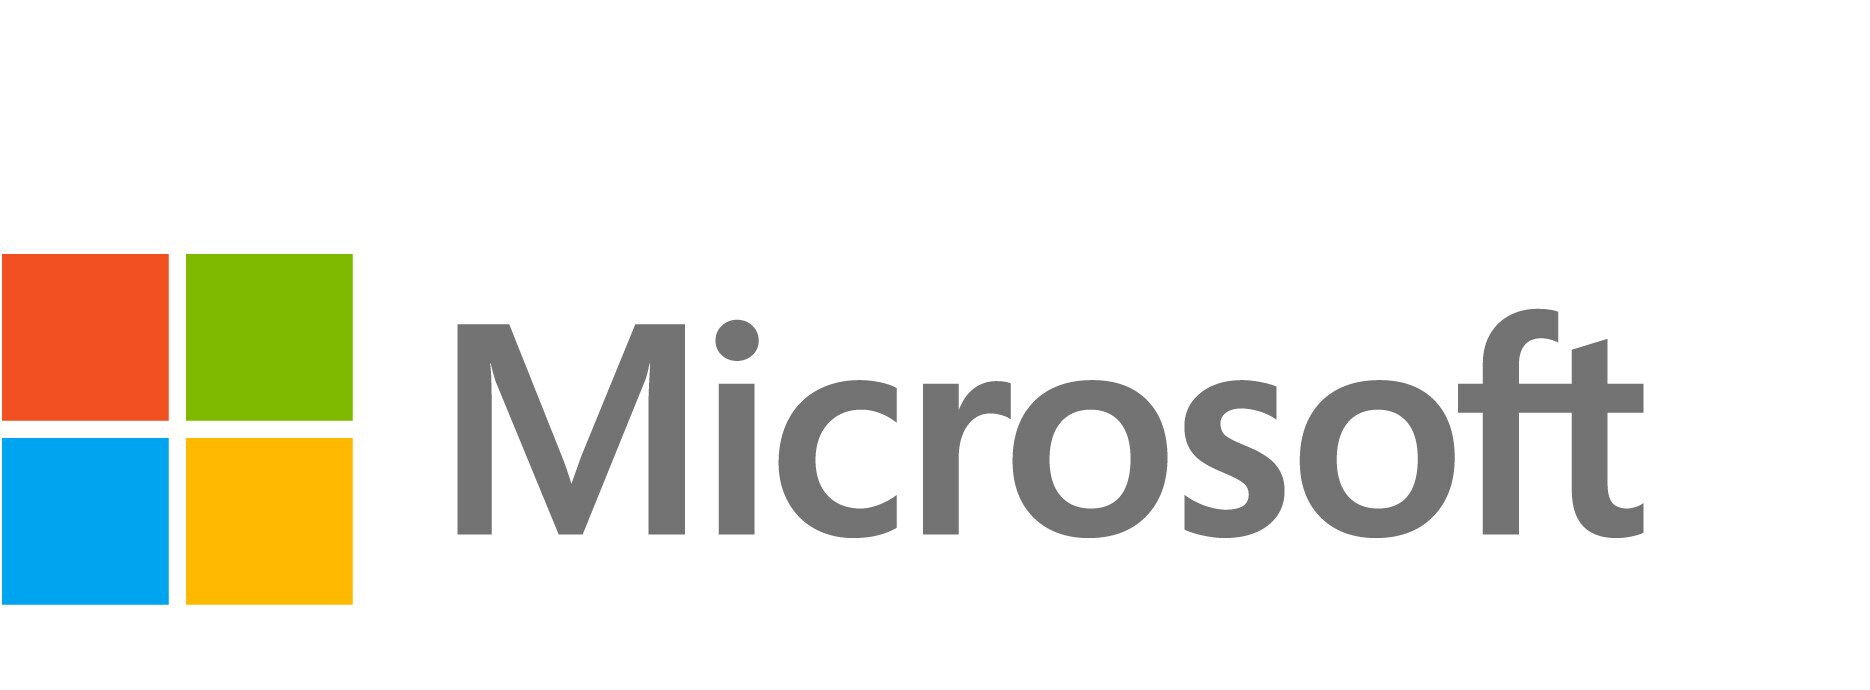 Microsoft 3 Year Extended Hardware Service Protection Plan-Surface Book